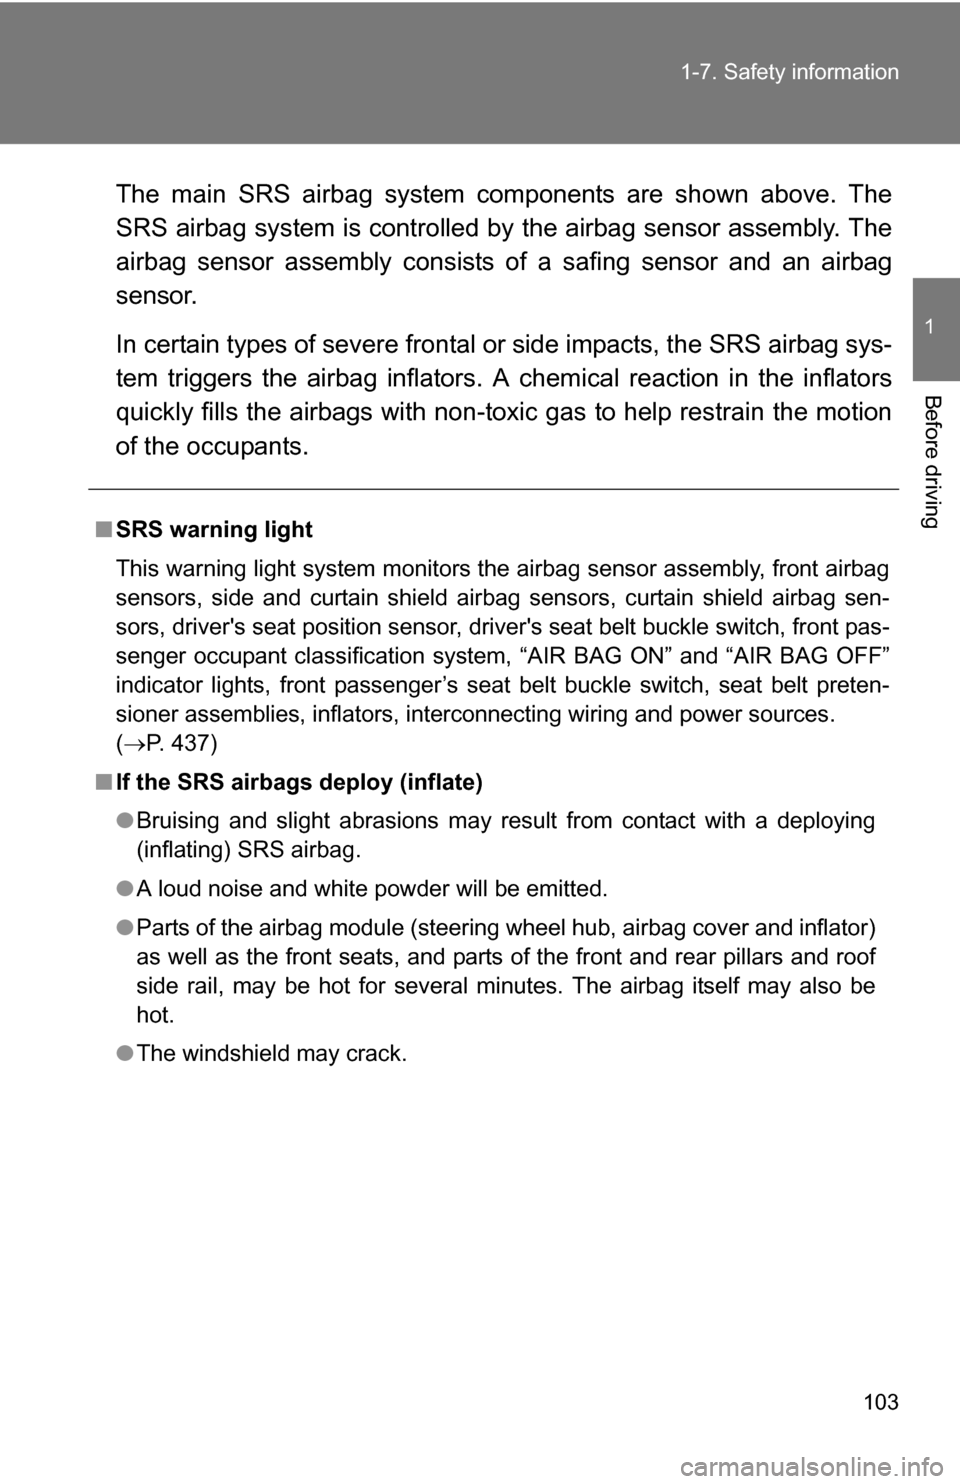 TOYOTA RAV4 2012 XA30 / 3.G User Guide 103
1-7. Safety information
1
Before driving
The main SRS airbag system components are shown above. The
SRS airbag system is controlled by
 the airbag sensor assembly. The
airbag sensor assembly consi